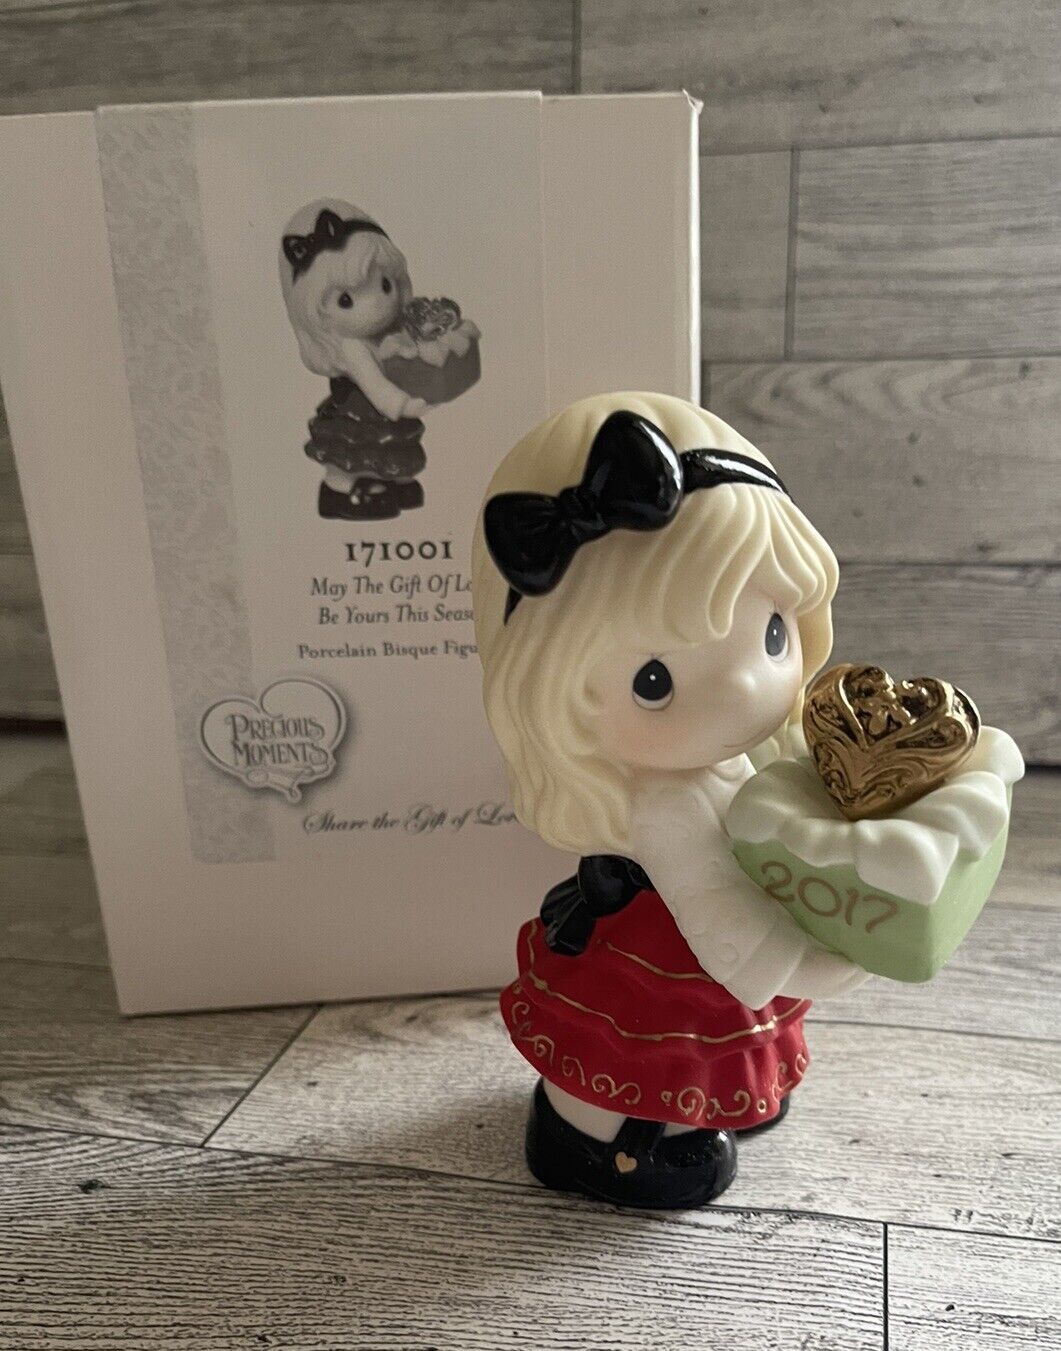 Precious Moments May The Gift Of Love Be Yours This Season 2017 Figurine